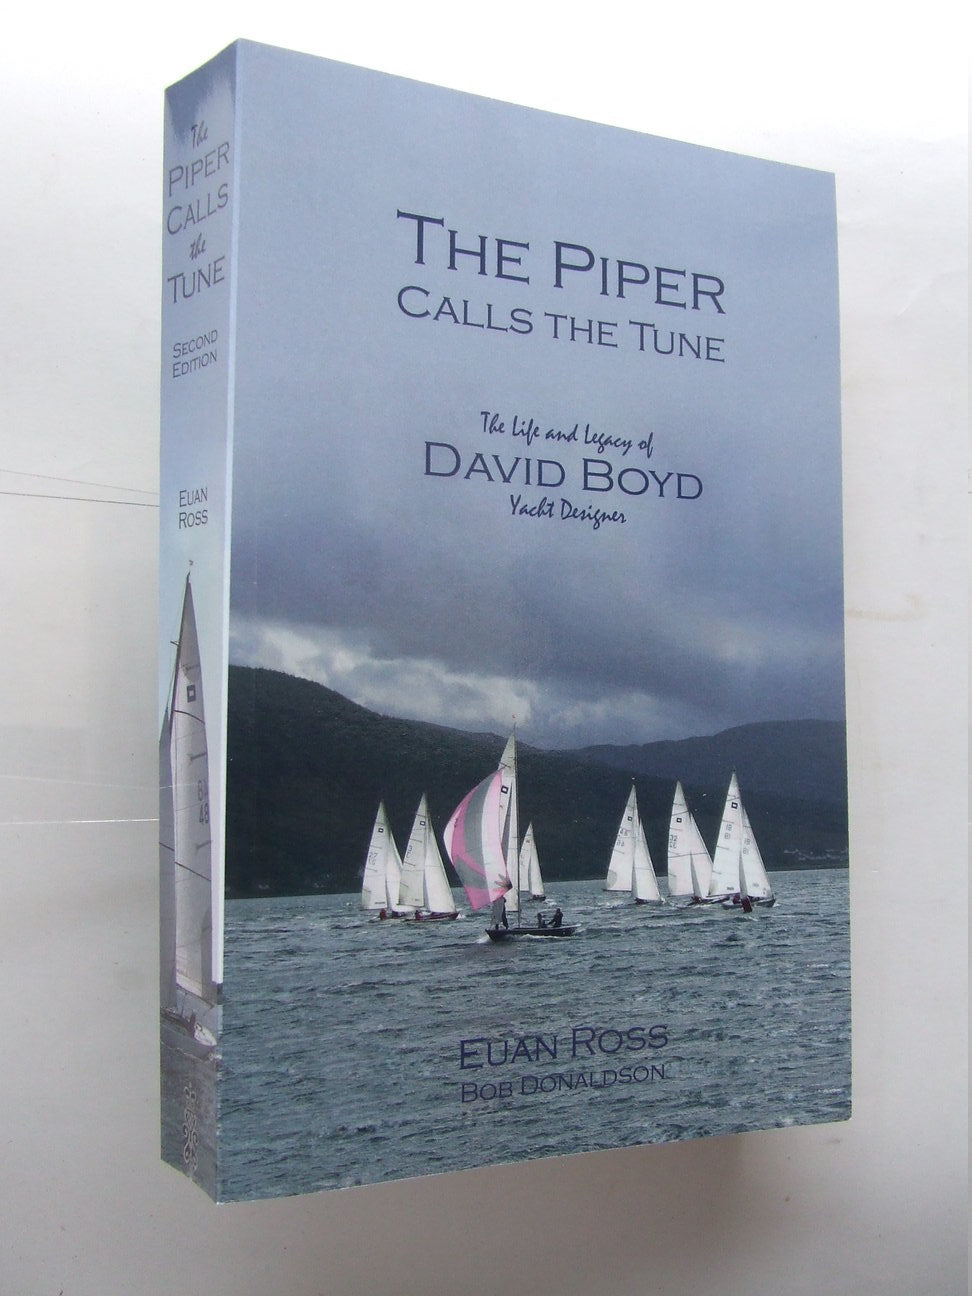 The Piper Calls the Tune, the life and legacy of David Boyd, yacht designer